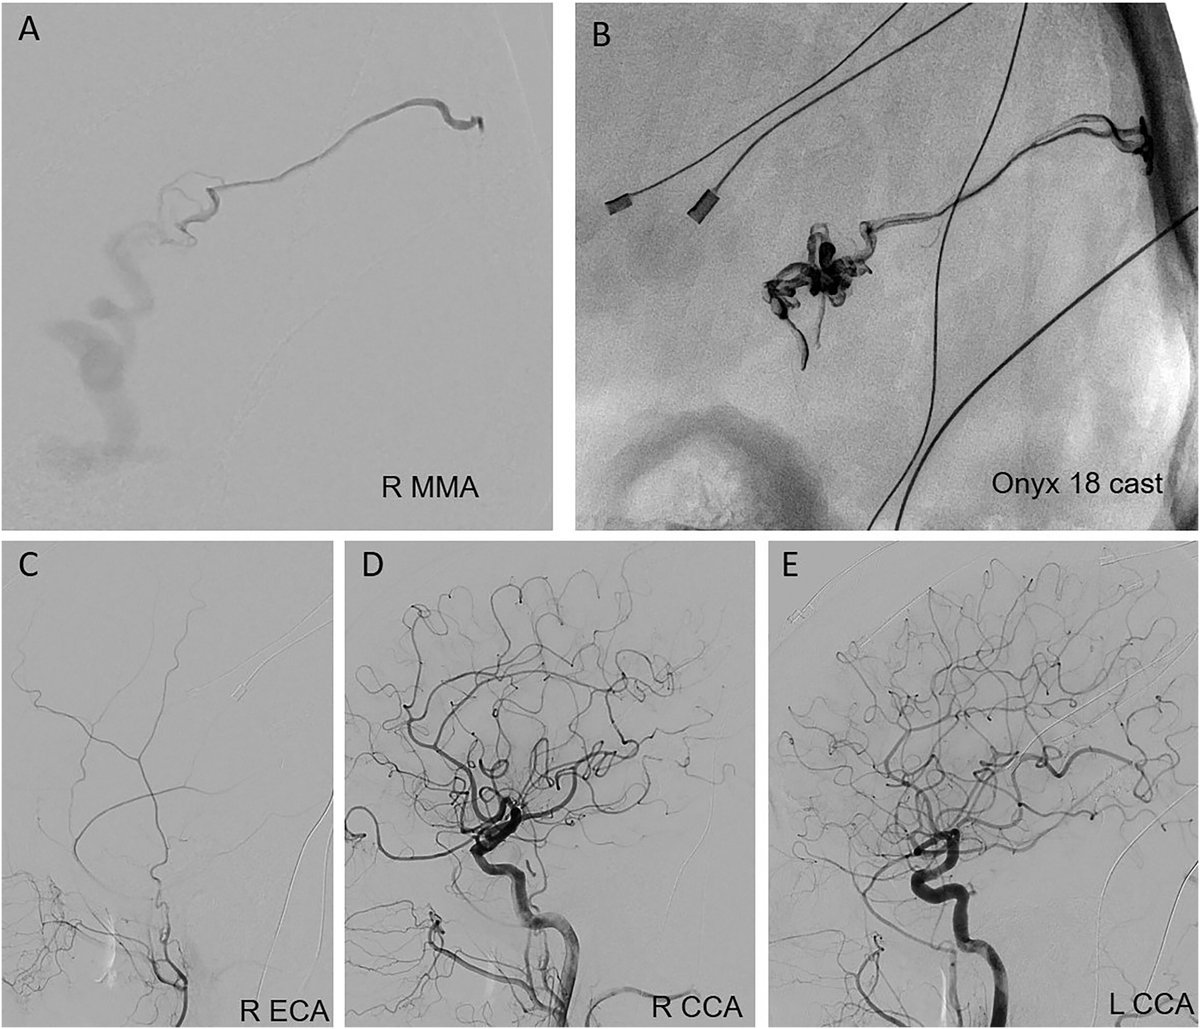 New for @INR_WFITN, our #cerebrovascular team presents a multicenter study on the clinical experience with the Scepter Mini balloon catheter using data from six North American cerebrovascular centers. @MMSalemMD @JanKarlBurkhar1 @visishs @GSSioutas ➡️ spr.ly/6018w4WXg